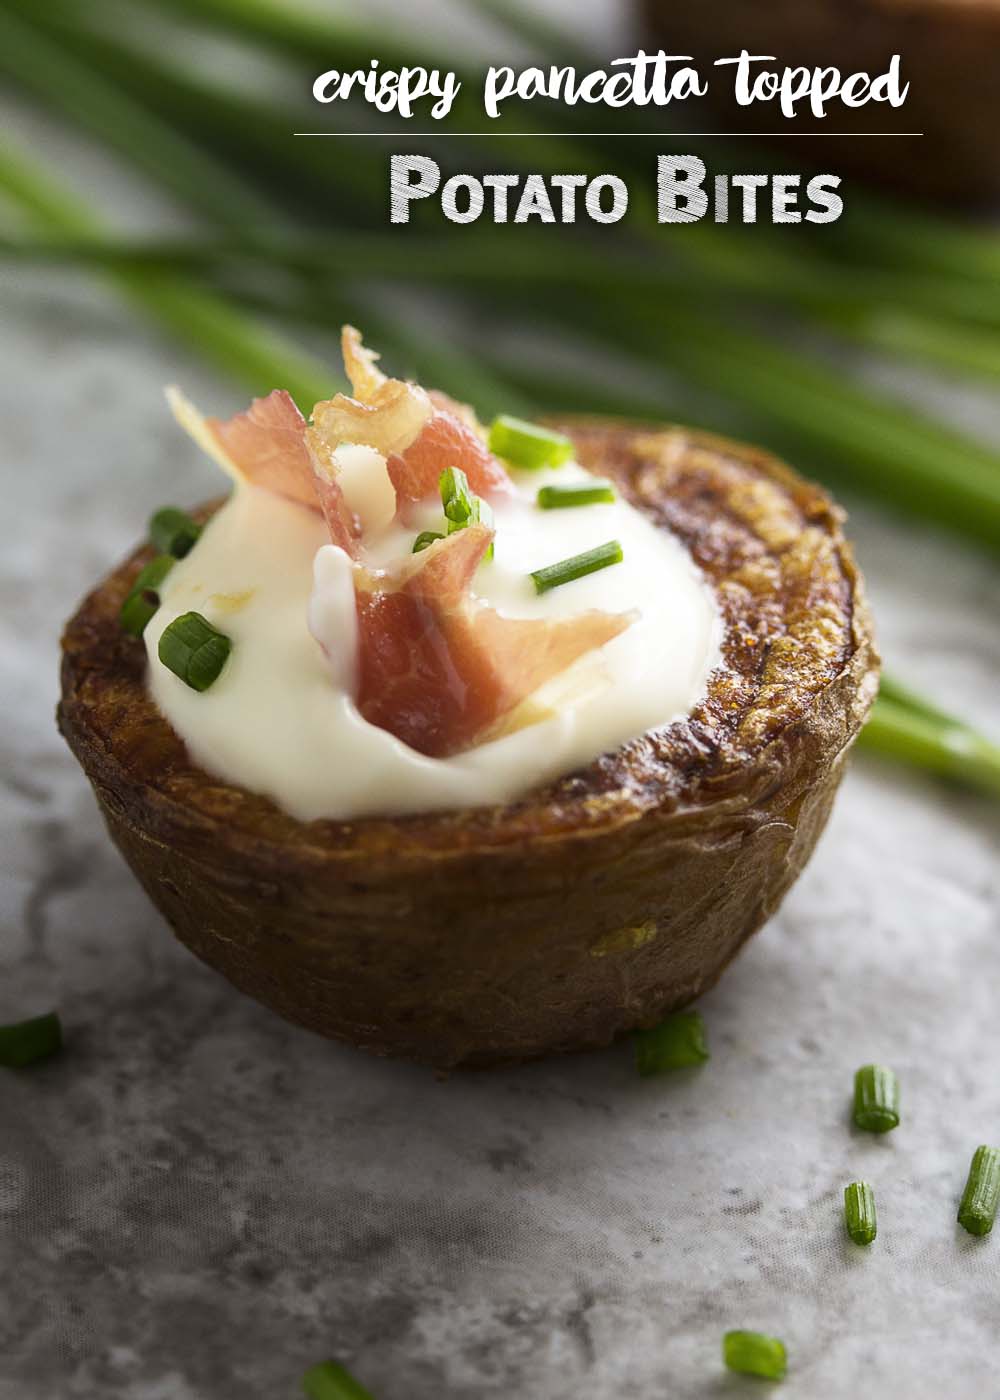 These loaded potato bites make a tasty appetizer for your next party! They are boiled and baked in the oven for extra crispiness and then topped with creme fraiche, pancetta (or bacon!) and chives. Gluten-free, easy, finger food! | justalittlebitofbacon.com